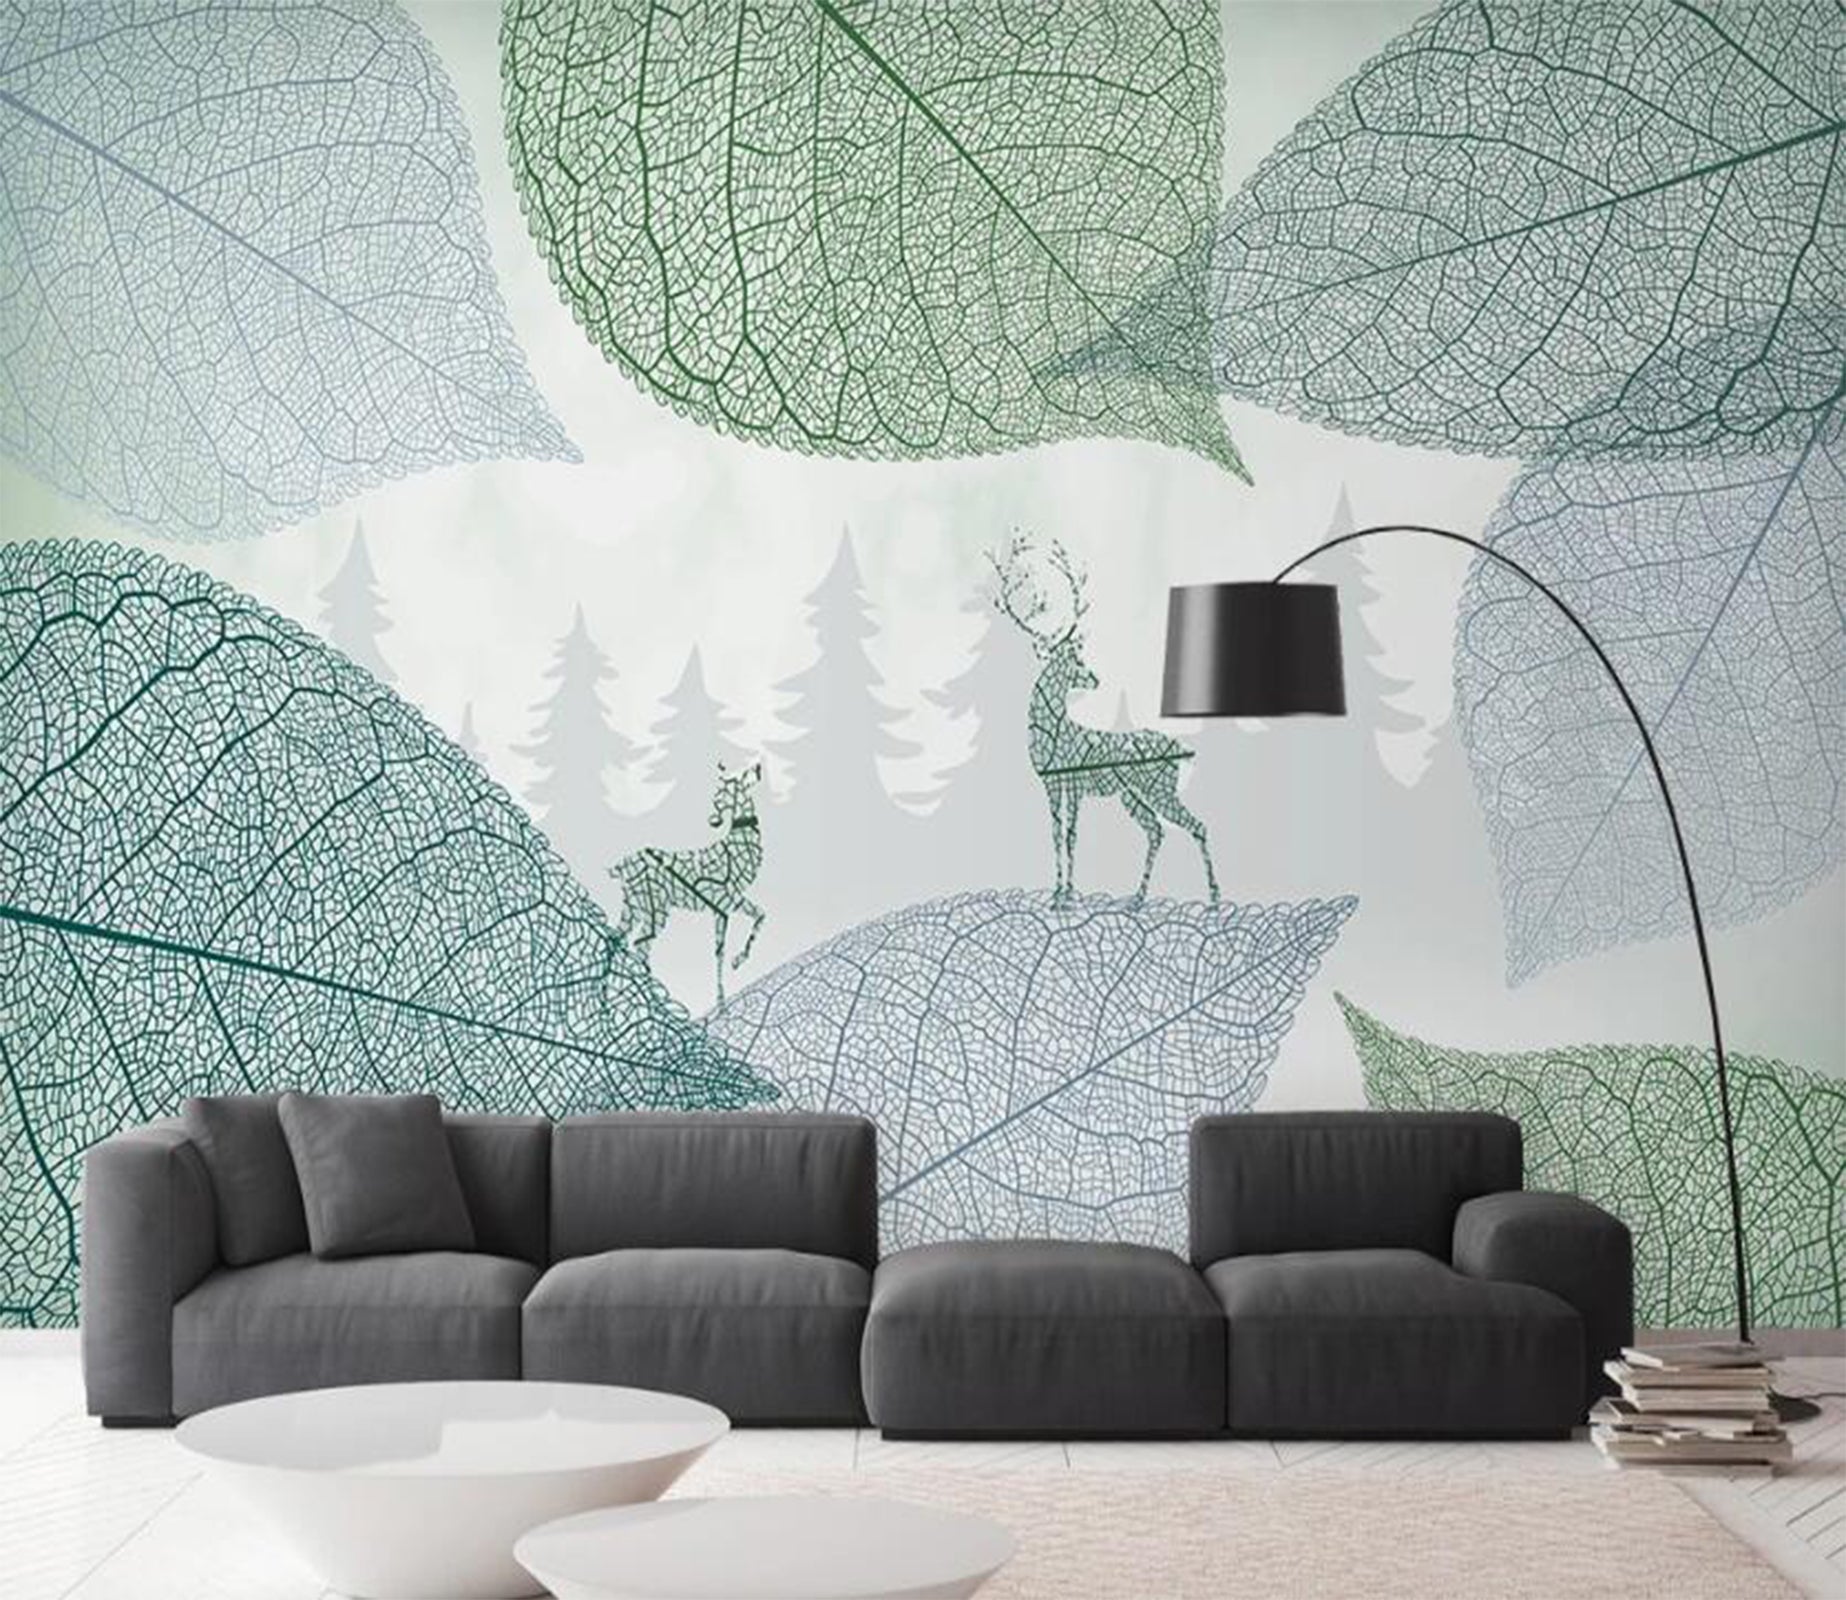 3D Clear Veins Of Leaves 2533 Wall Murals